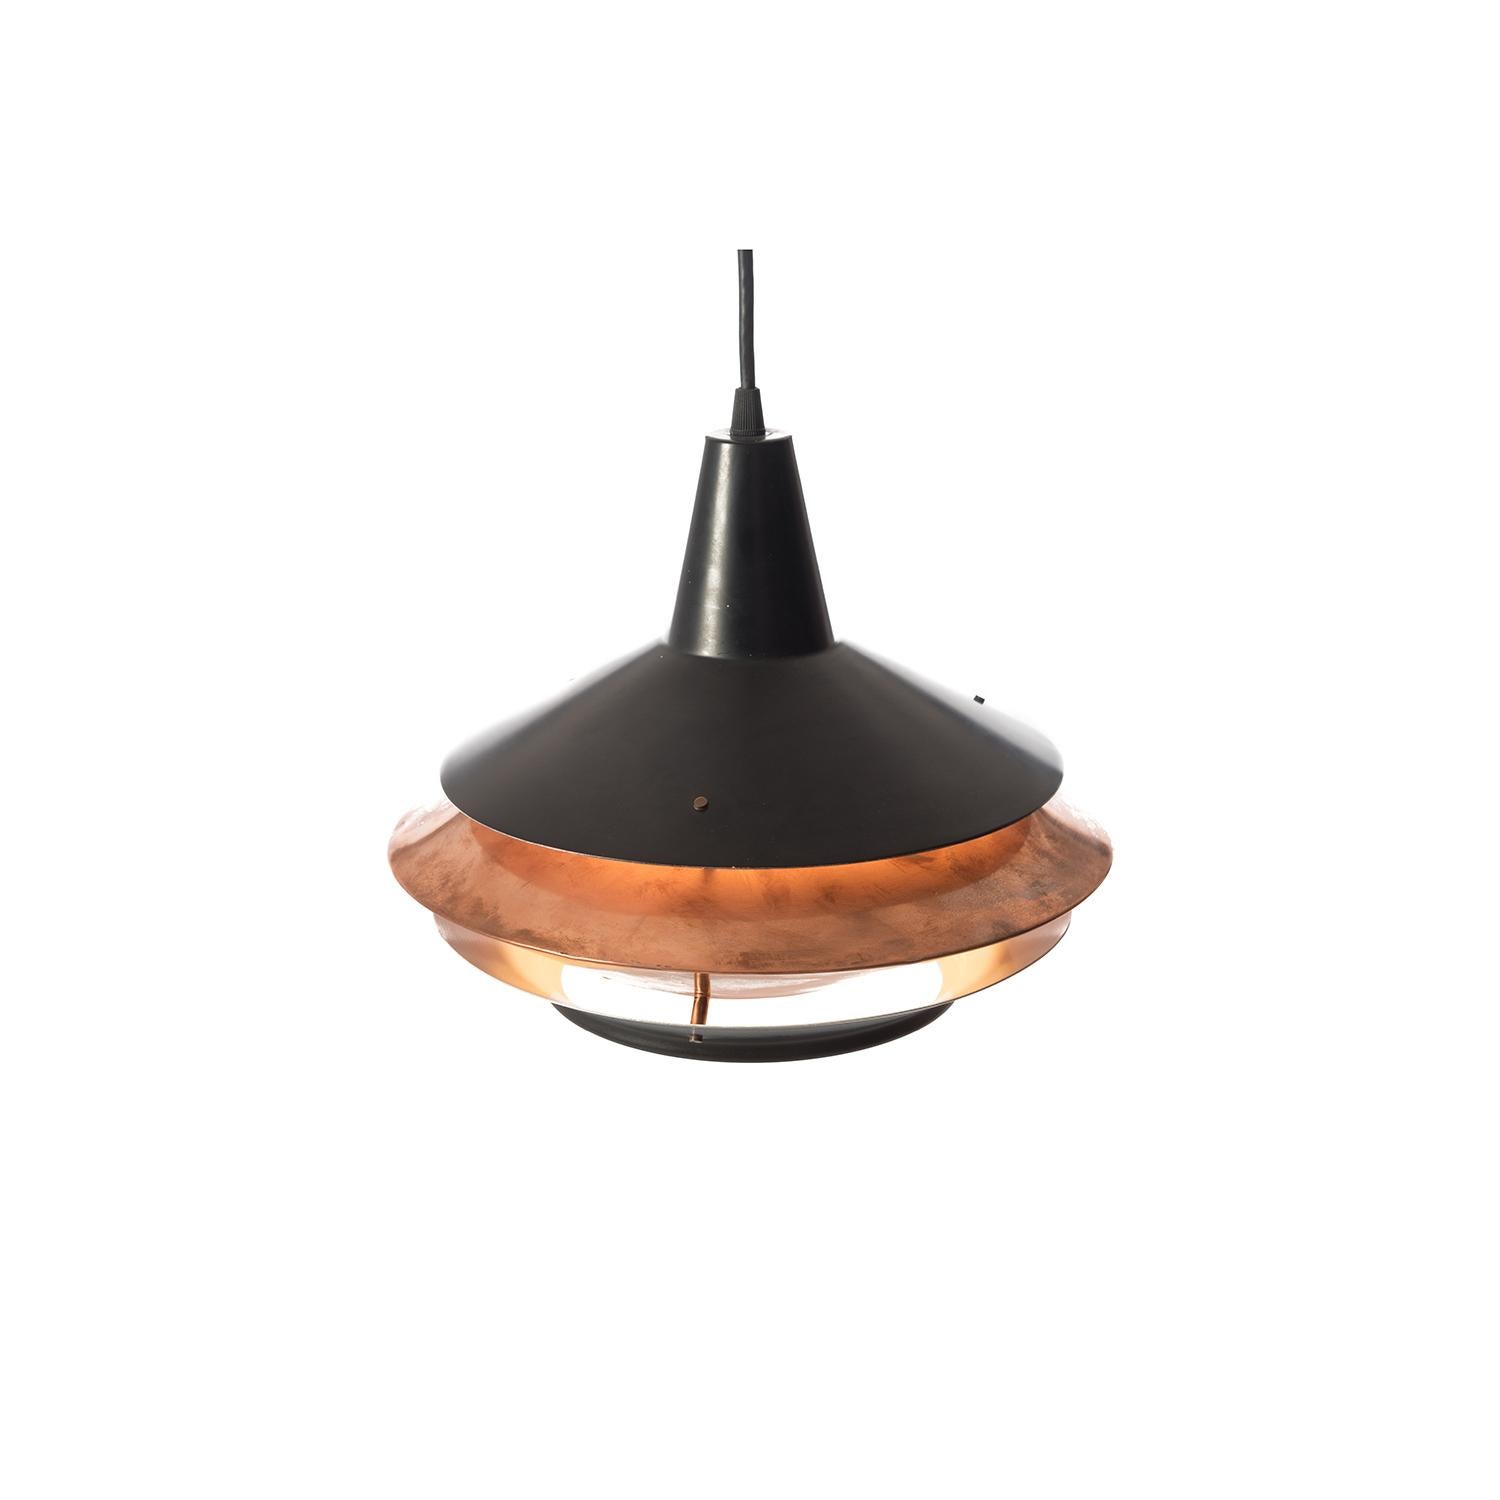 Painted Scandinavian Modern Vintage Lantern Shaped Pendant Fixture in Black and Copper